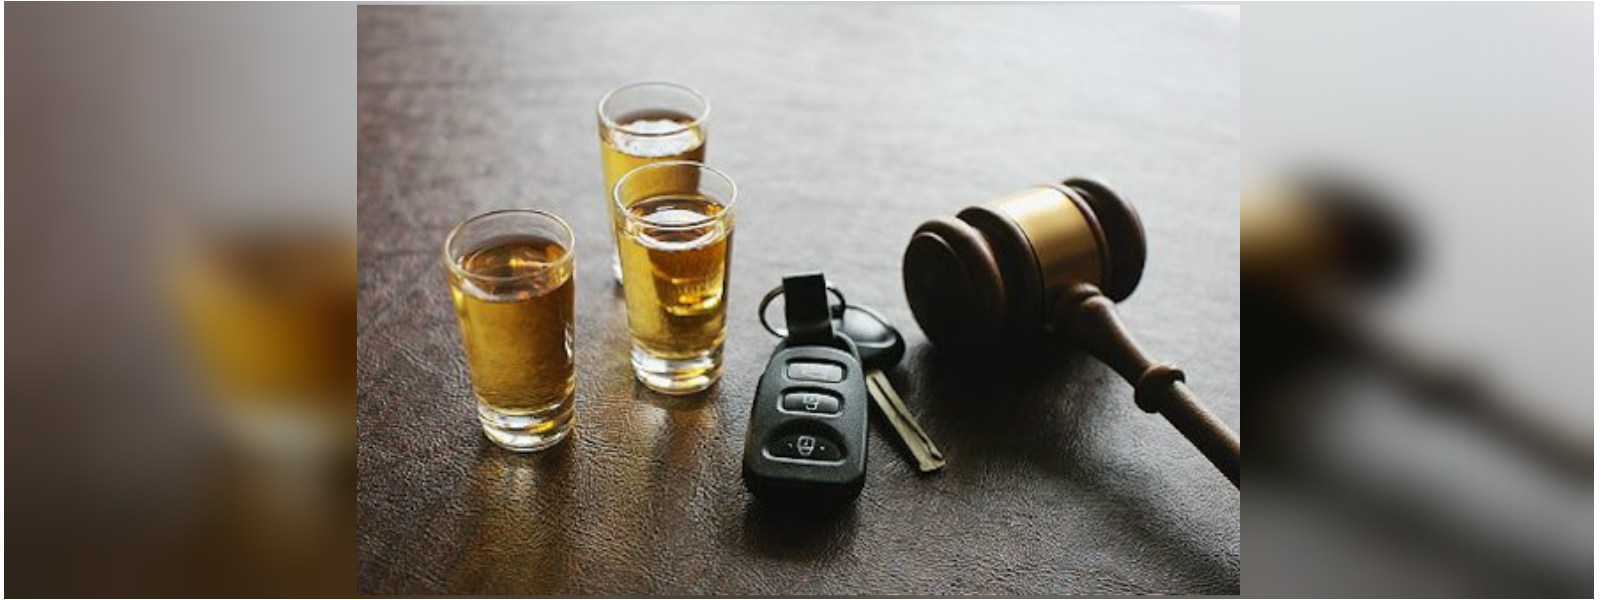 DUI Operations: 7802 arrested since July 5th